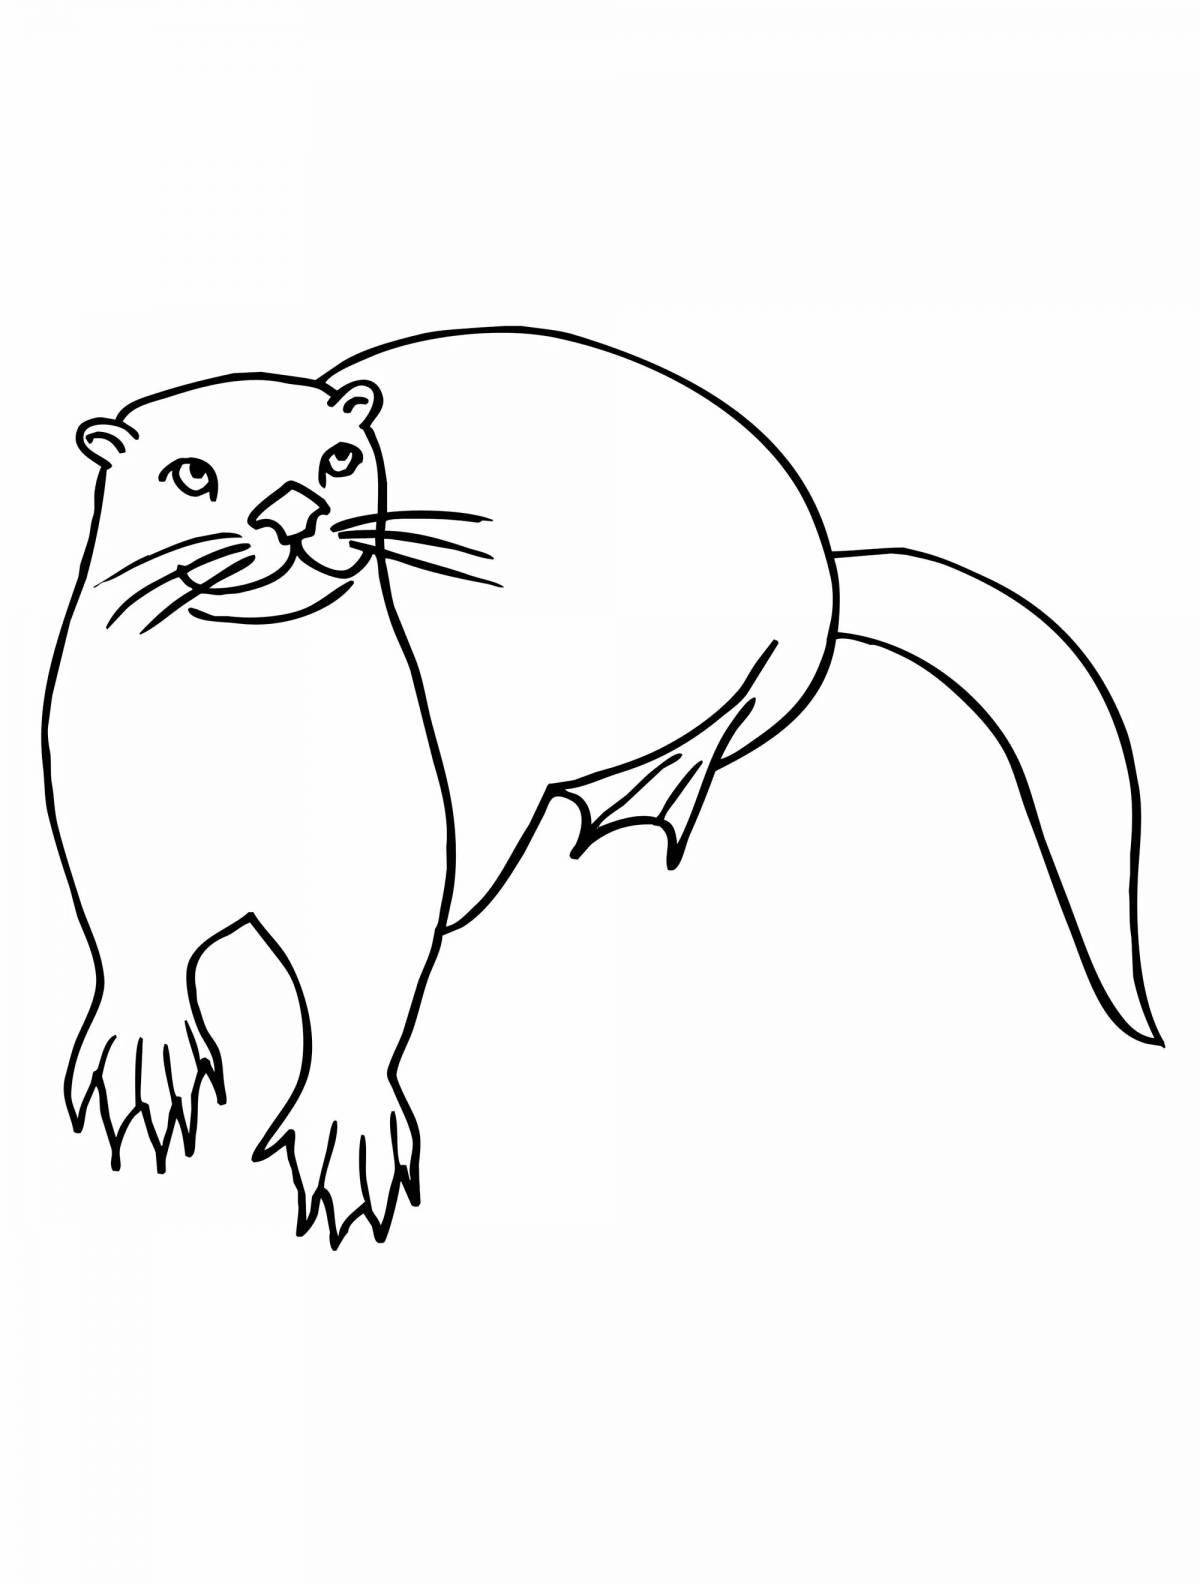 Comic otter coloring book for kids